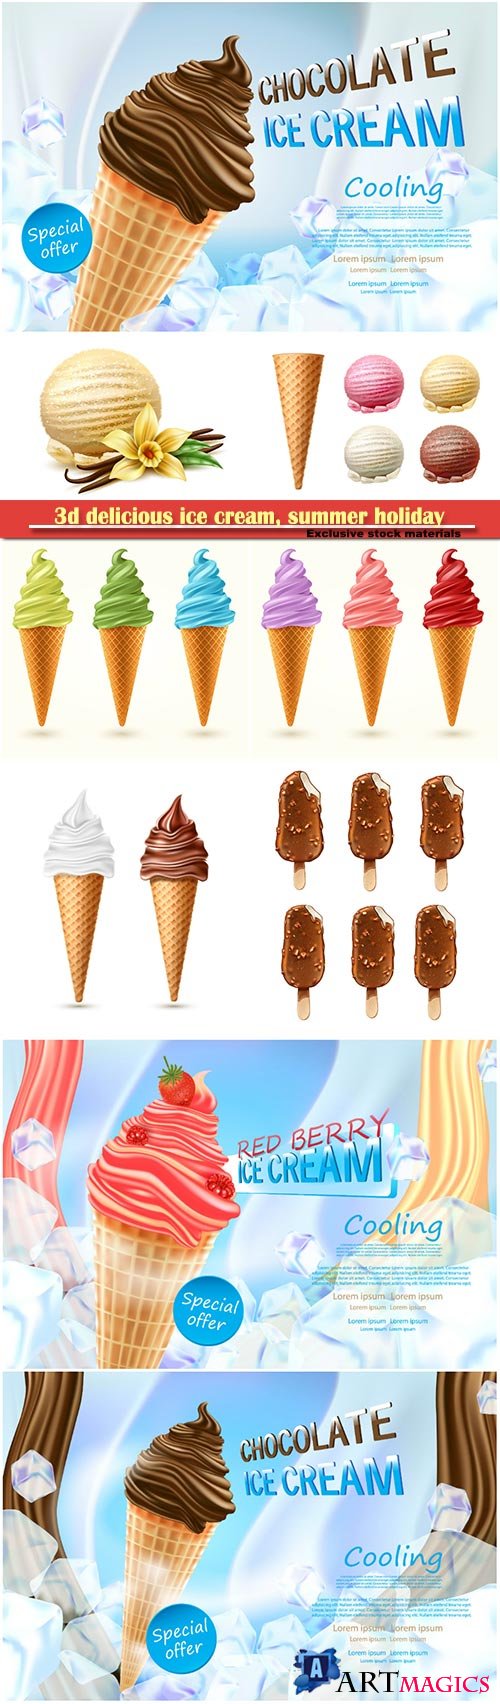 3d delicious ice cream, summer holiday advertising design